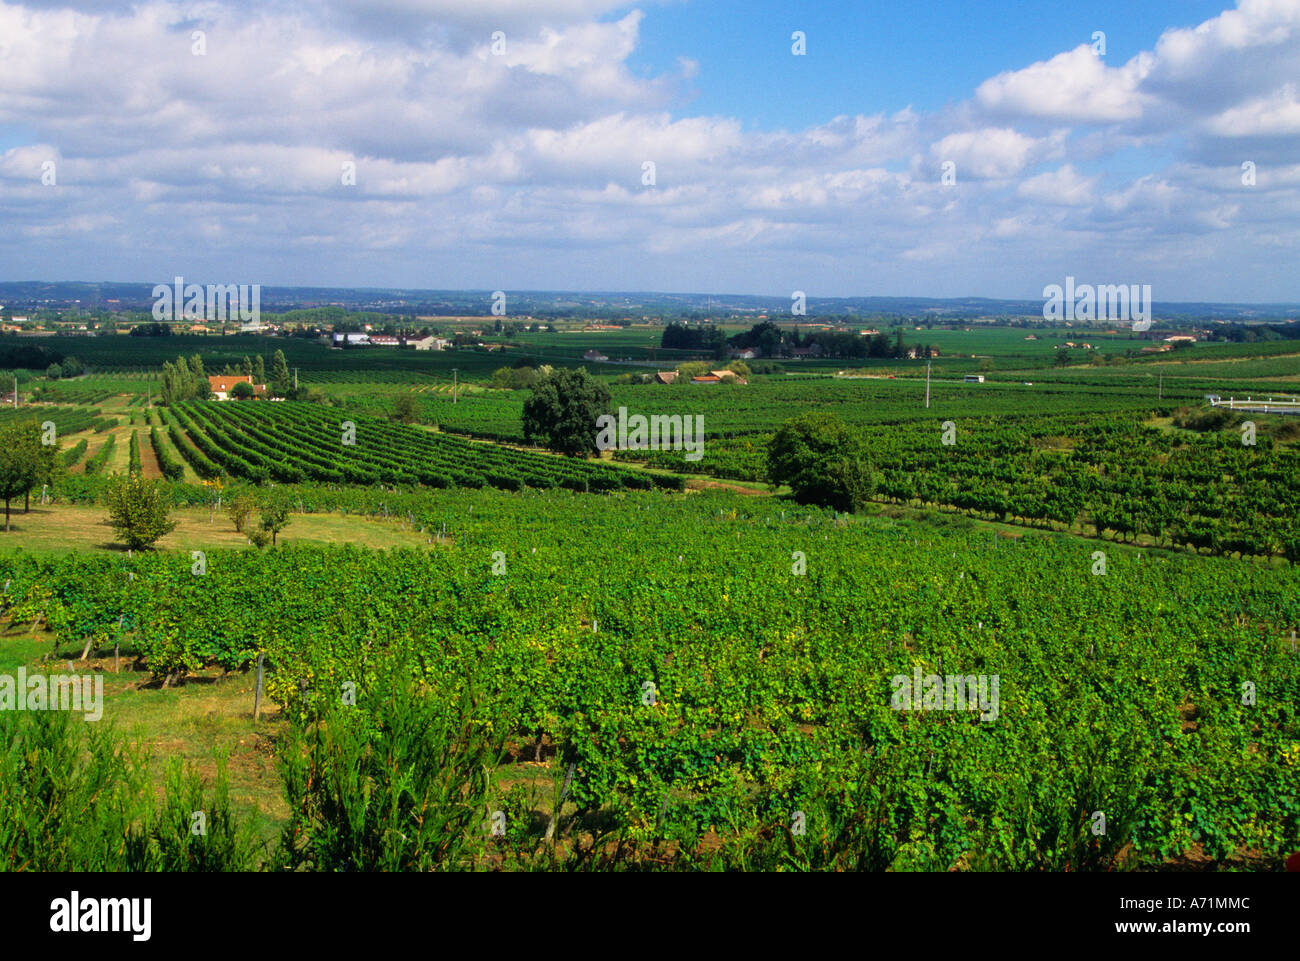 France Farmland. The Dordogne Valley Vineyards Wine Country. Growing Grapes Stock Photo